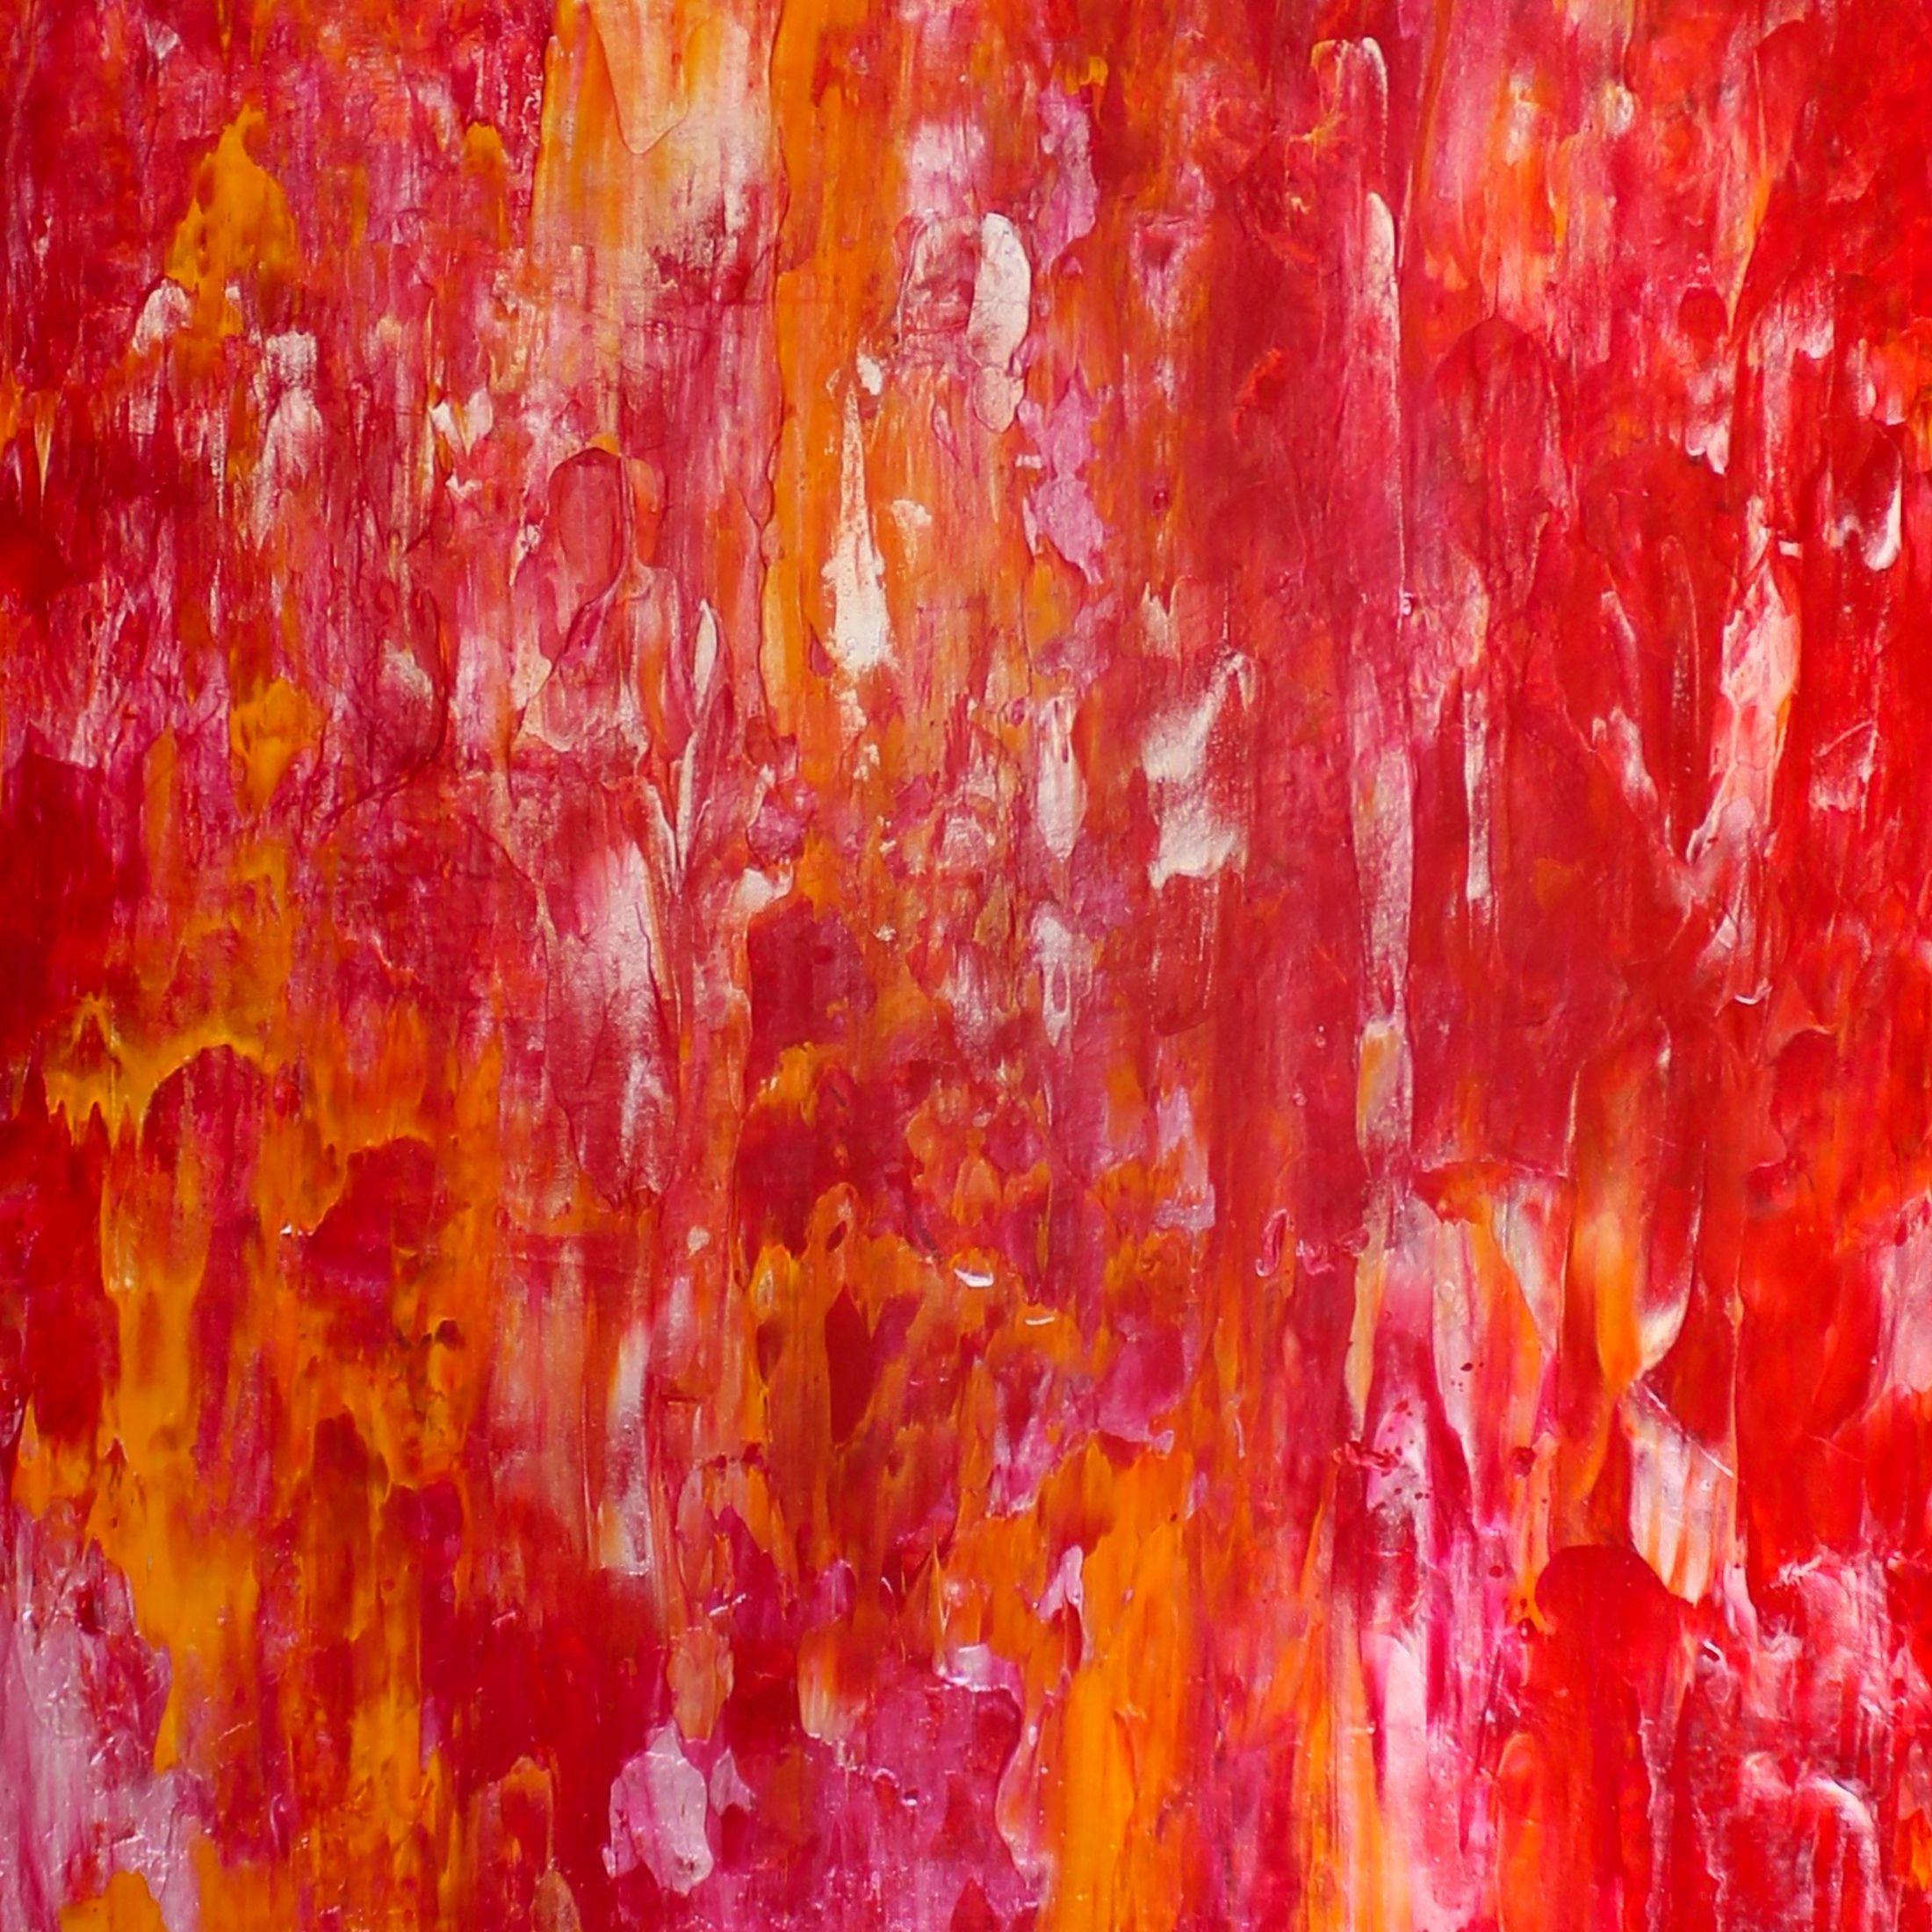 Eternal Sunset # 2, Painting, Acrylic on Canvas - Red Abstract Painting by Nestor Toro